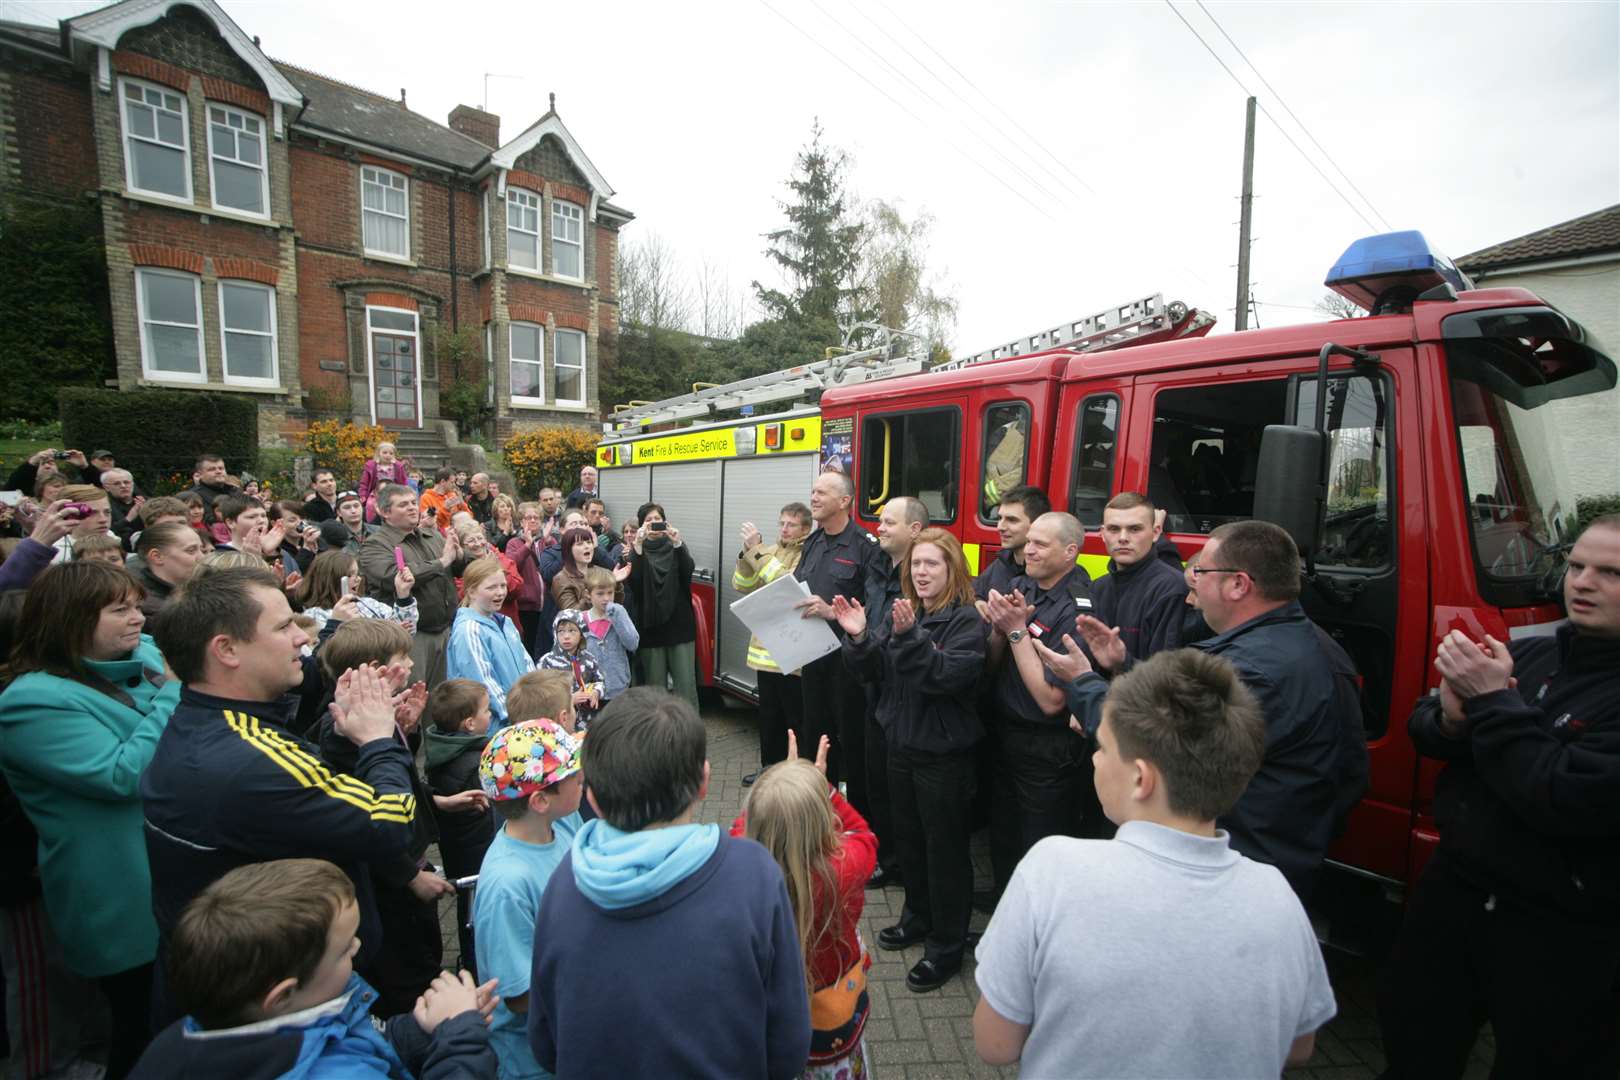 Residents out in force on the streets of Halling to wave goodbye to the Halling Fire Firefighters when the Halling Fire Station closed